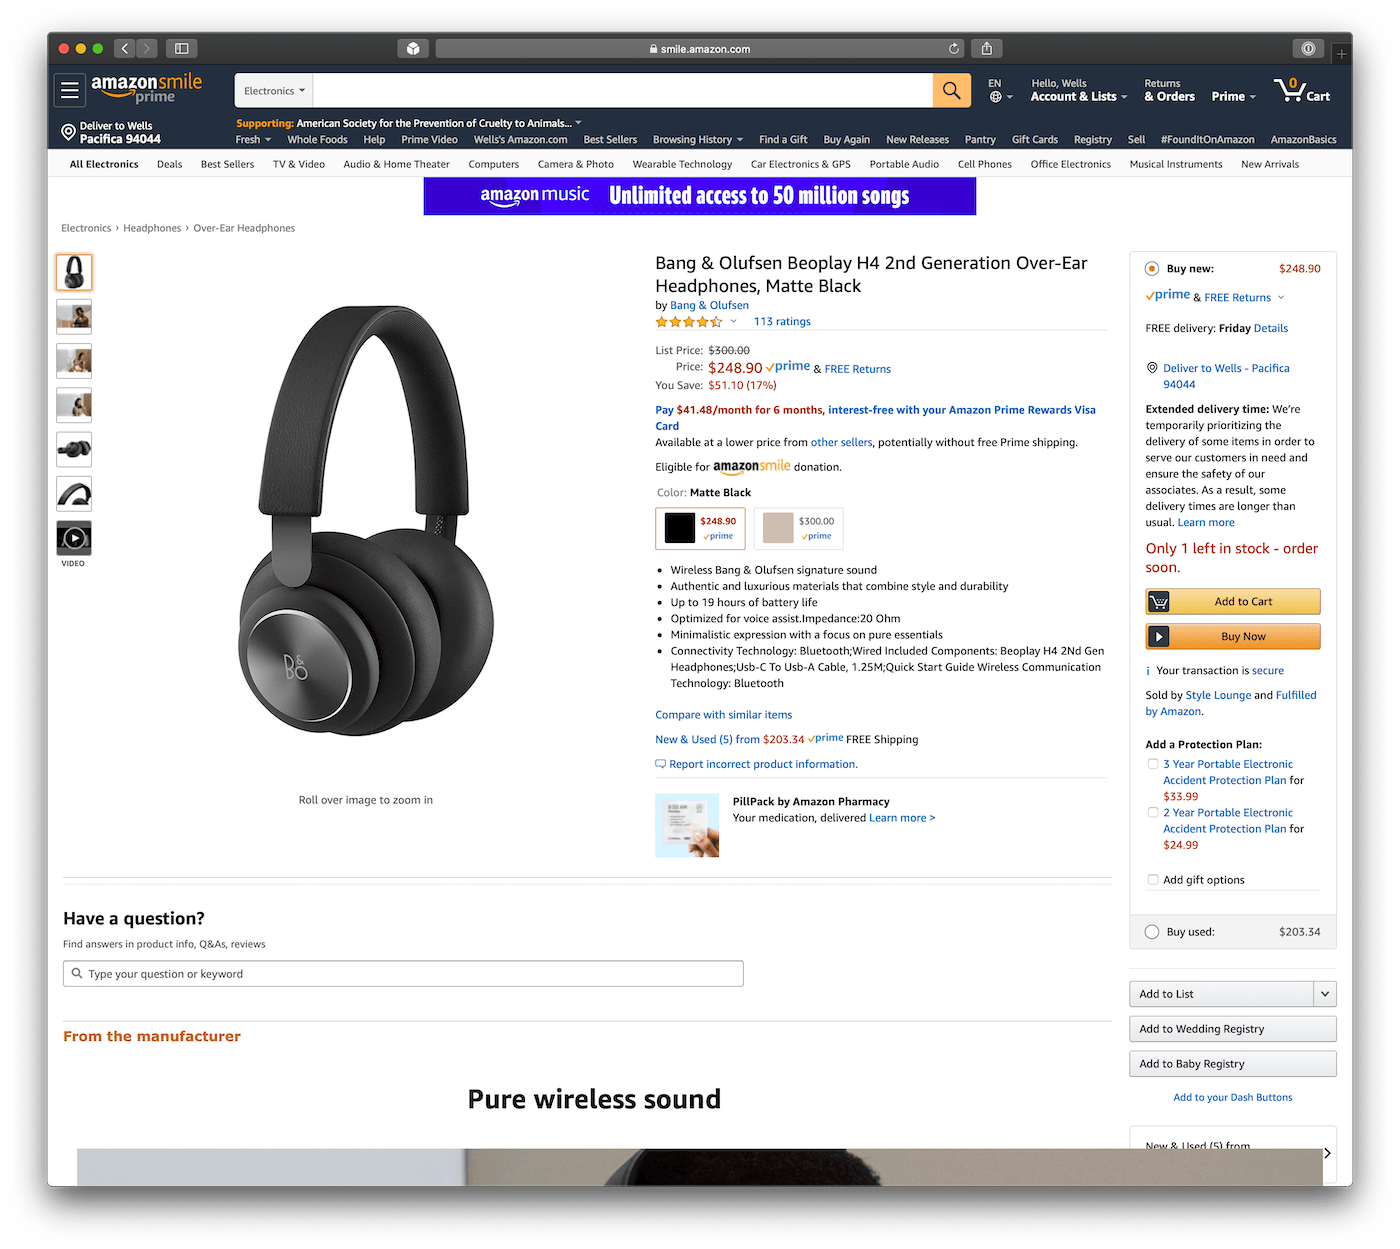 amazon.com product page before